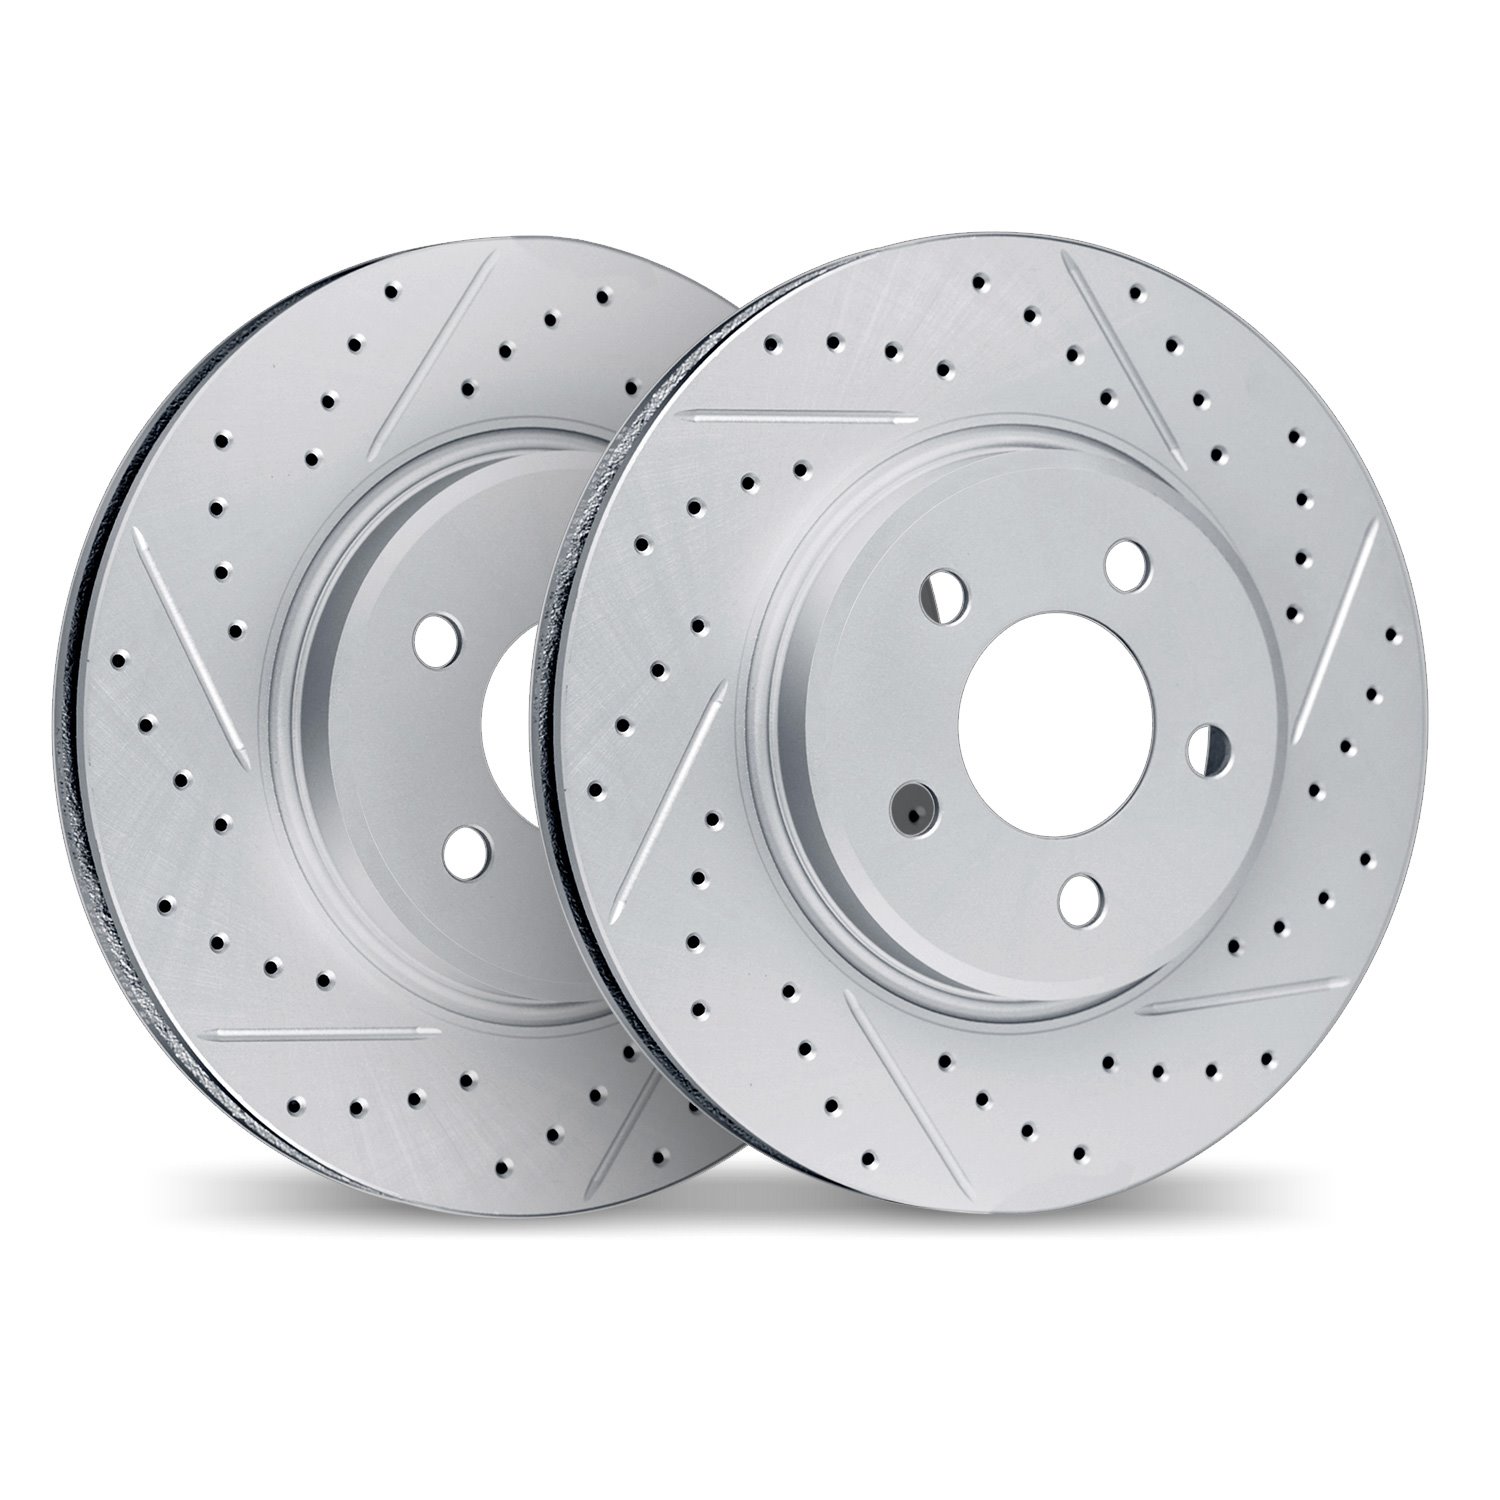 2002-80018 Geoperformance Drilled/Slotted Brake Rotors, 2007-2015 Ford/Lincoln/Mercury/Mazda, Position: Front